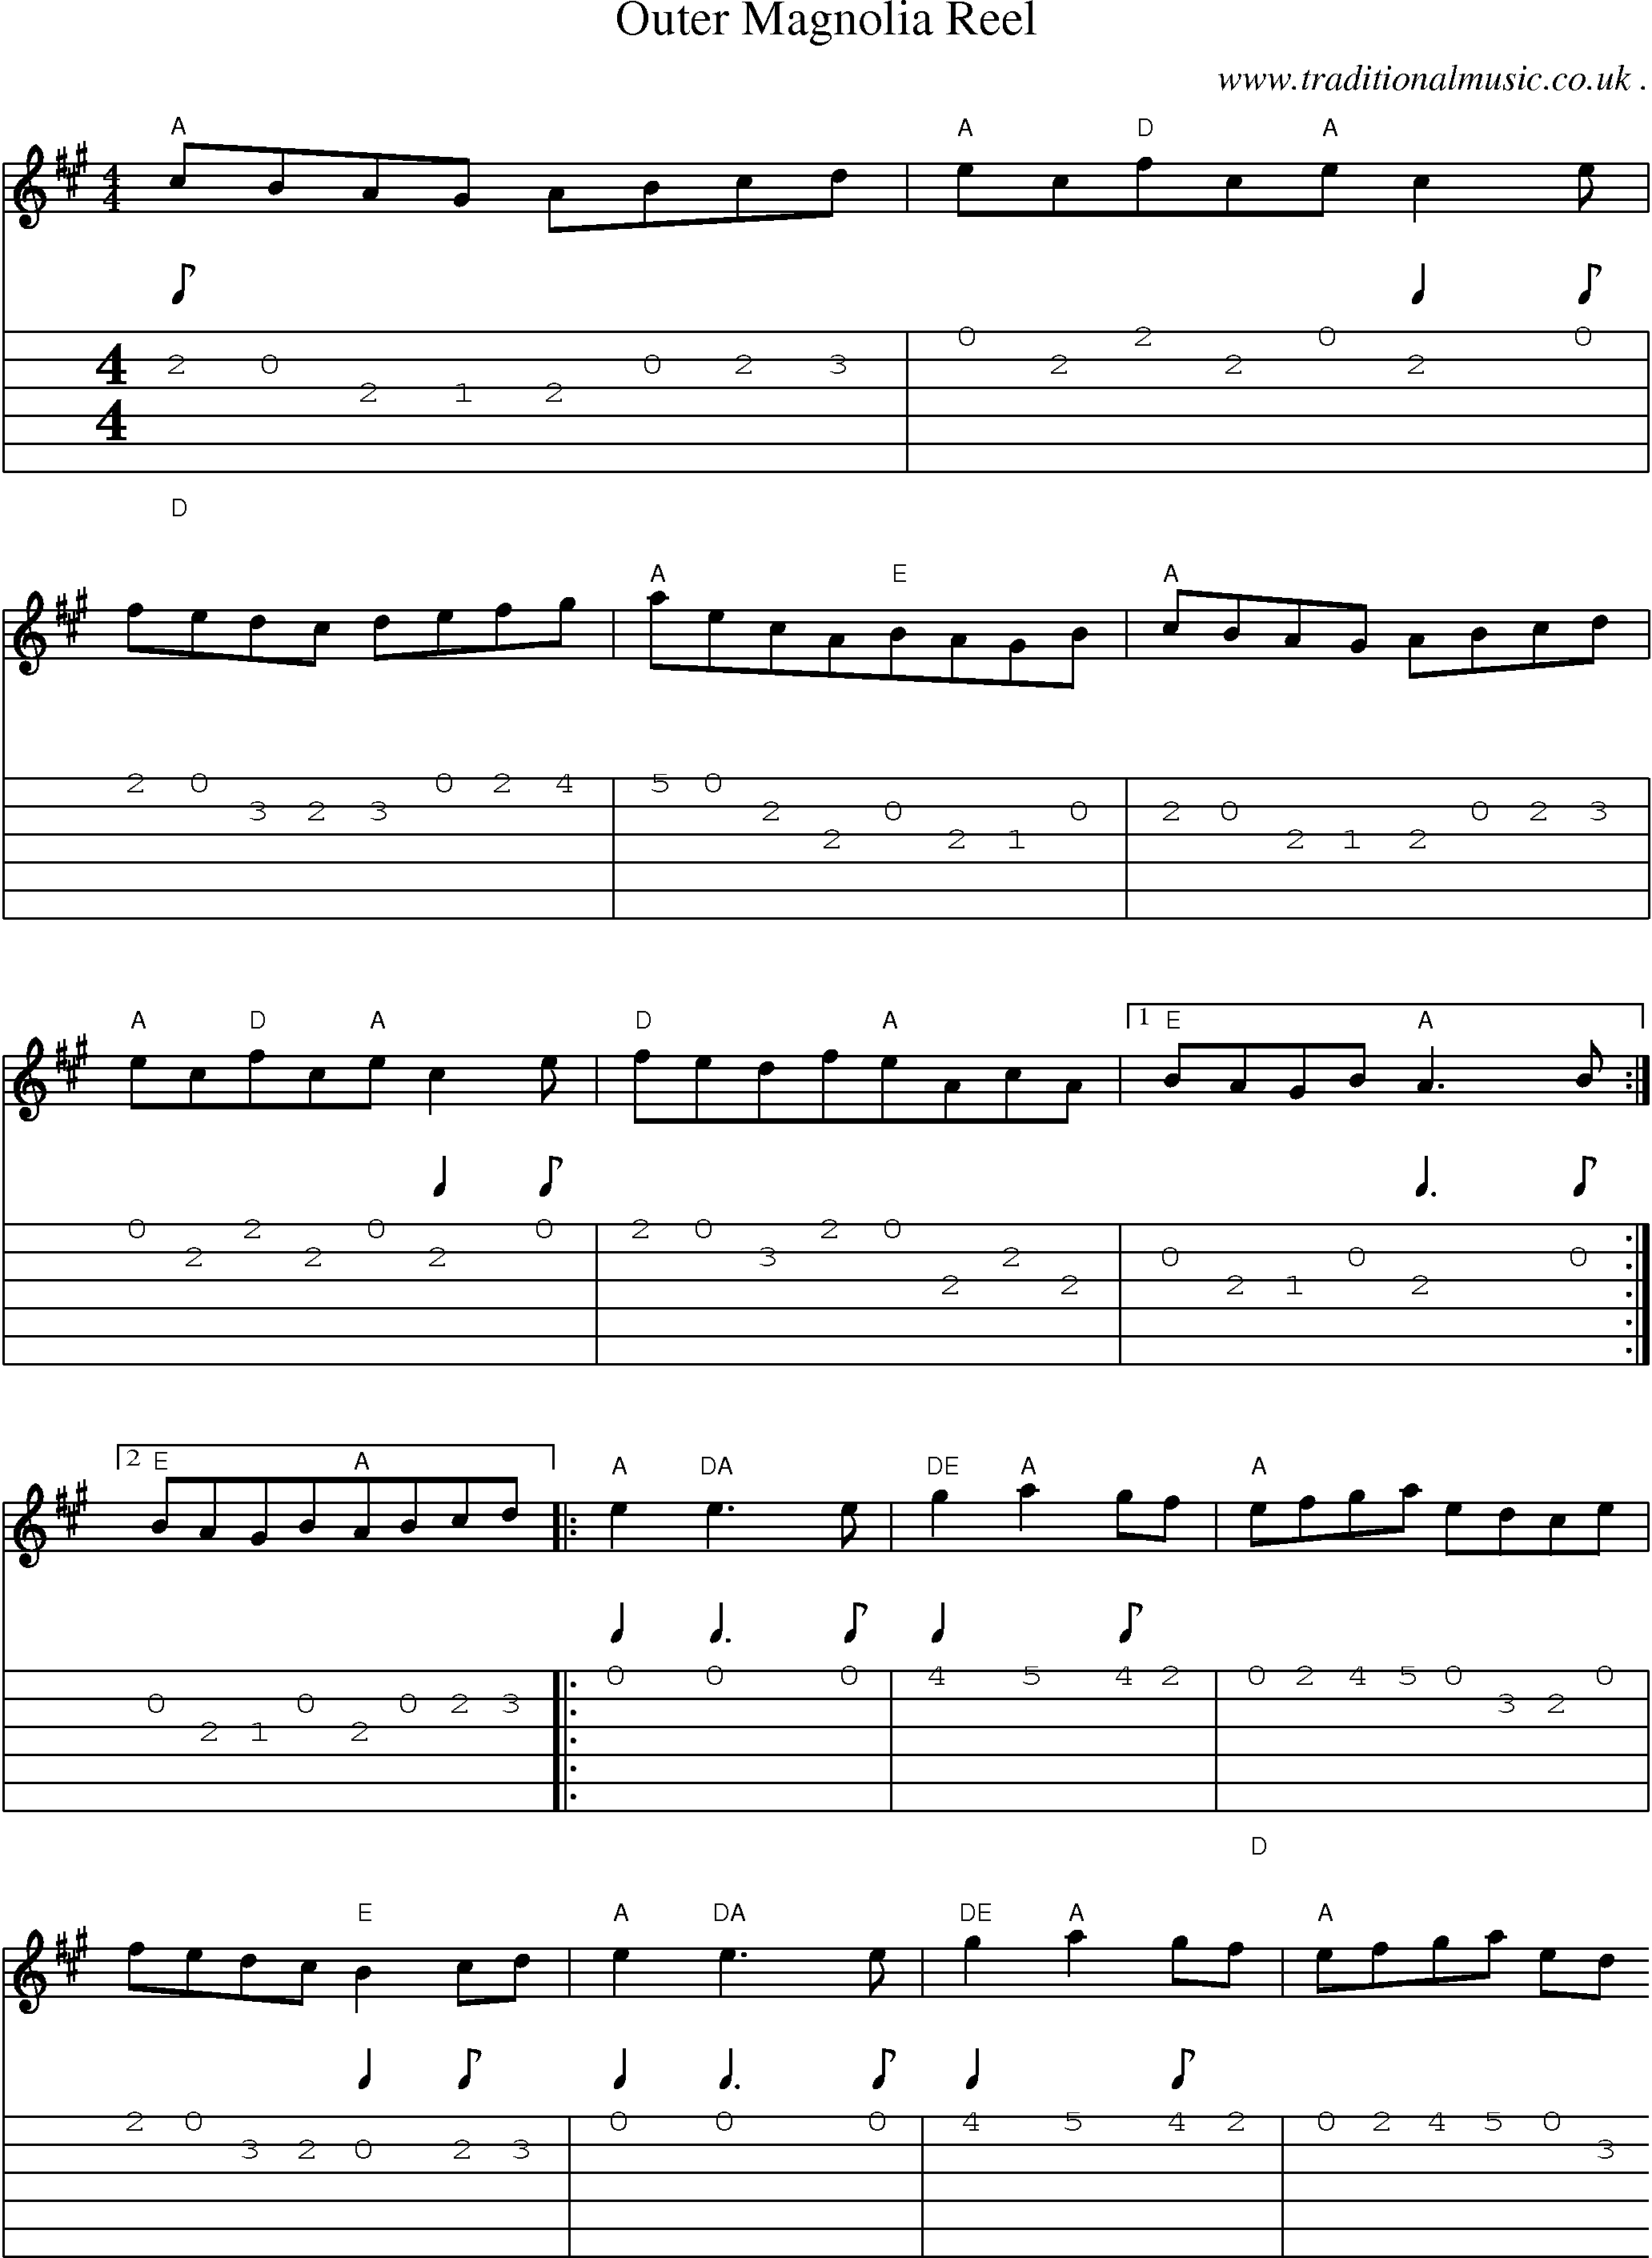 Sheet-Music and Guitar Tabs for Outer Magnolia Reel